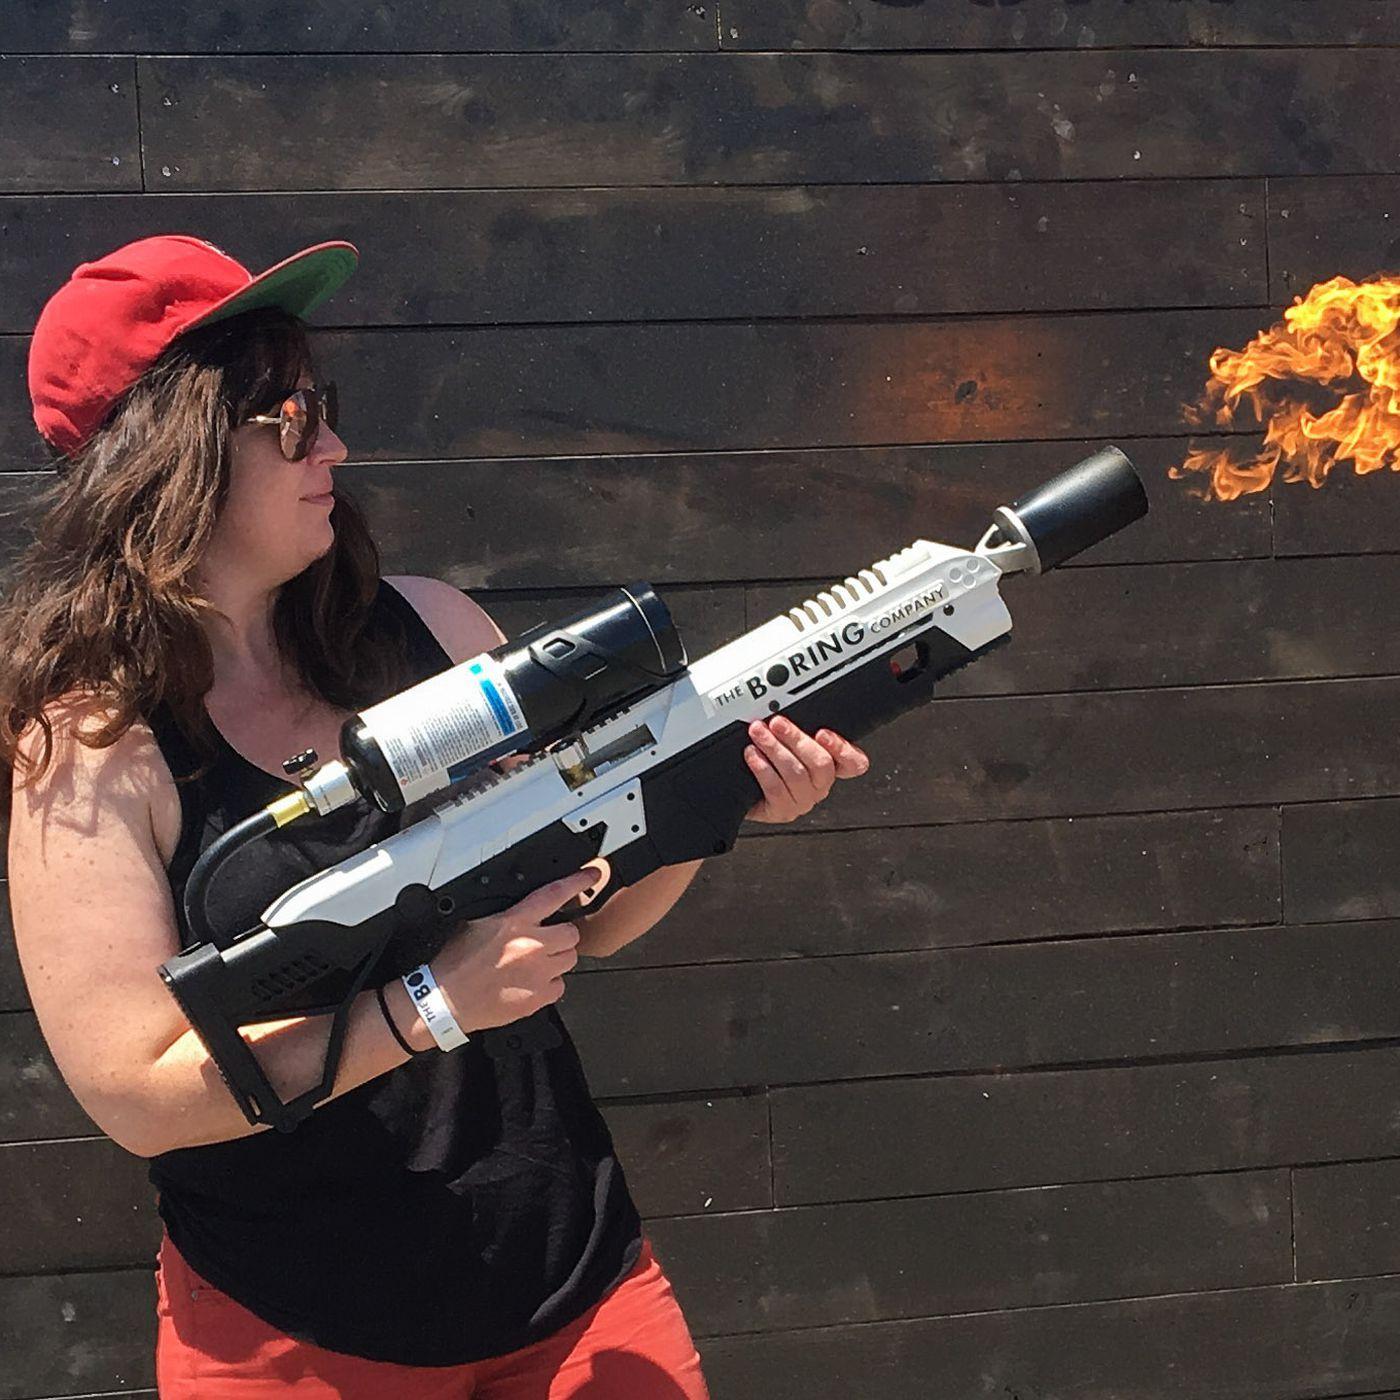 The Boring Company Flamethrower Logo - I picked up a Boring Company Not-A-Flamethrower and it's mine now ...